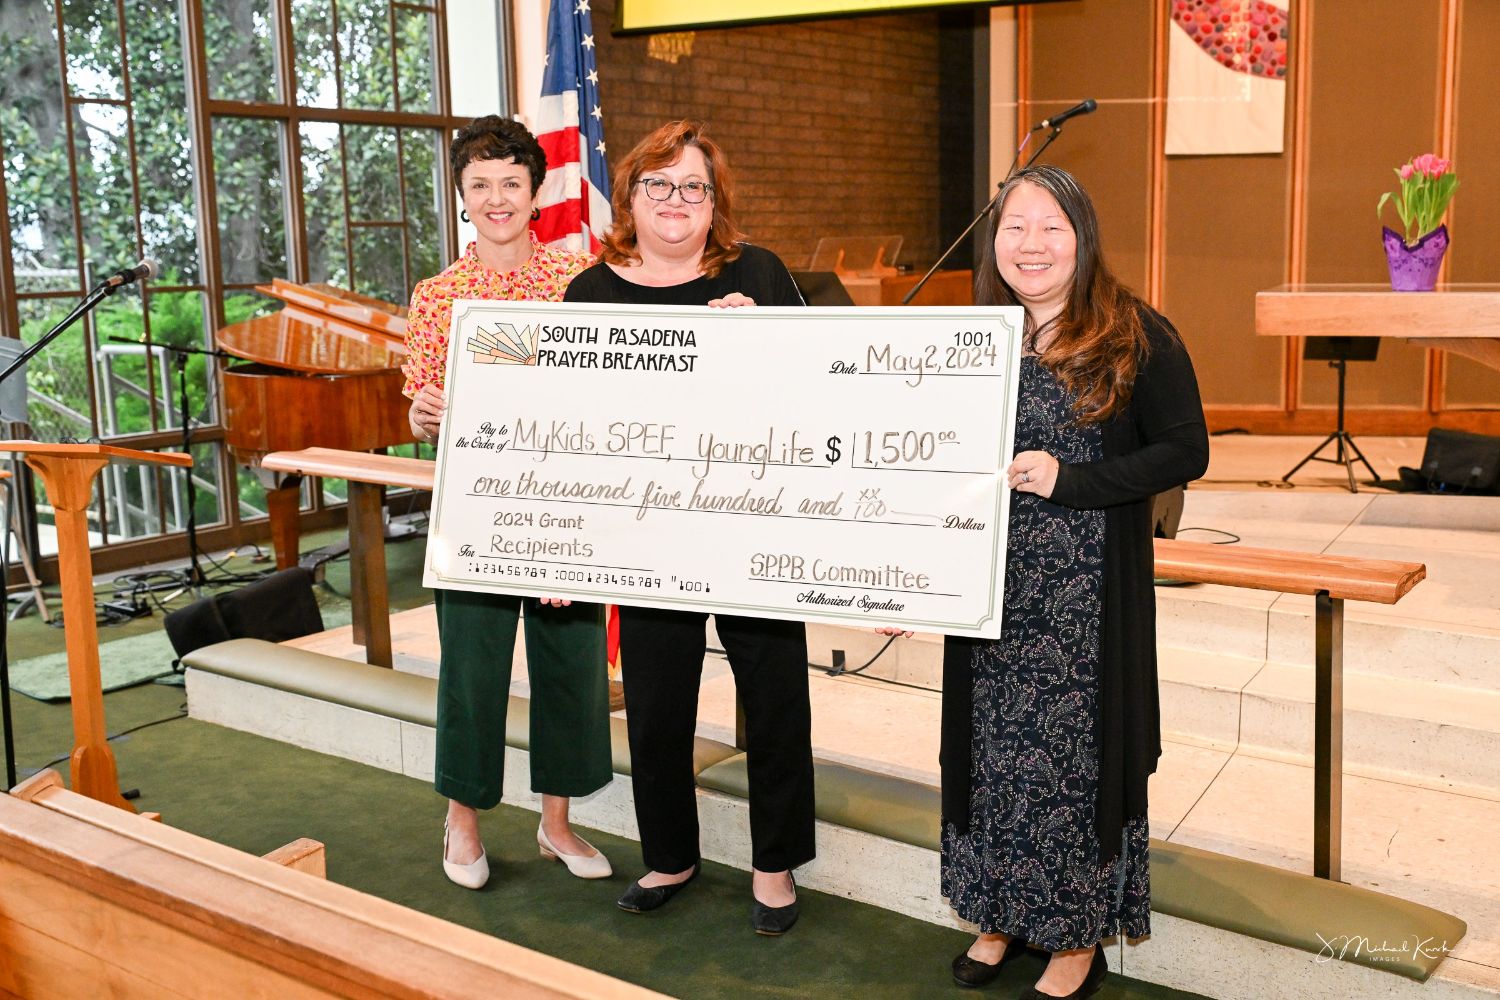 PHOTO: brought to you by Karen Kano |  South Pasadenan |  LR SPPB President Nancy Norris, SPEF Executive Director Stacey Petersen, SPEF Board Member Grace Liu Kung, as SPEF receives a $1,500 grant for SPHS and SPMS Wellness Centers.